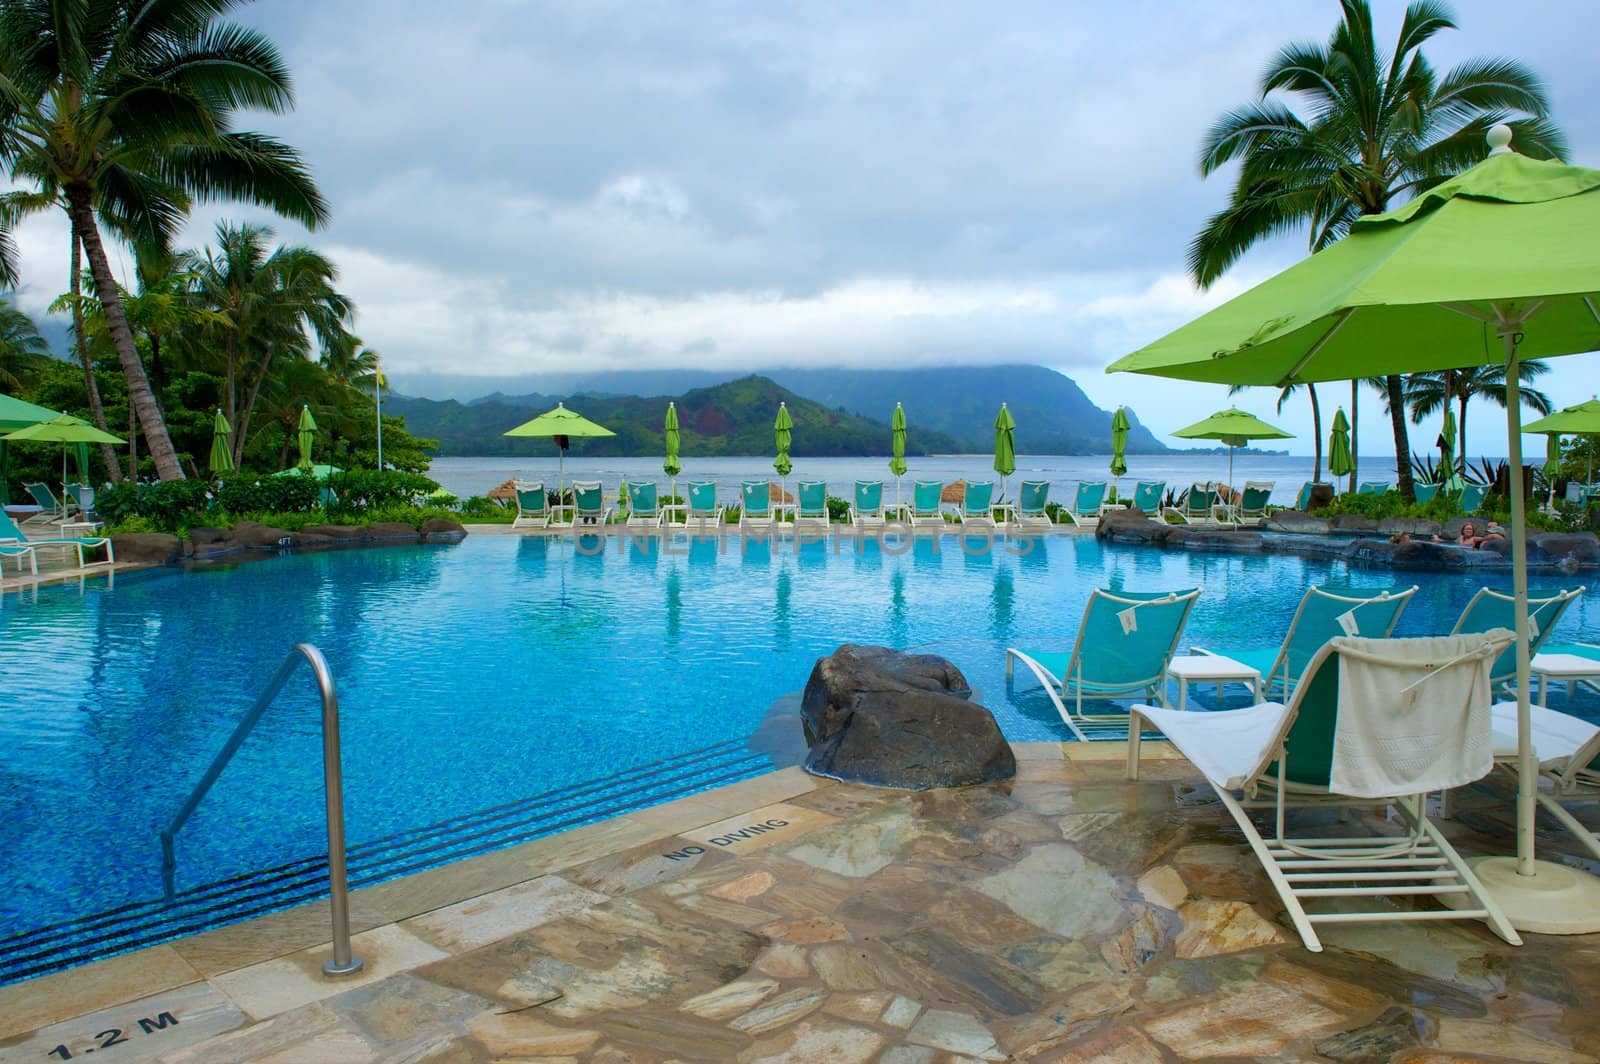 By the pool at a resort on the Hawaiian island of Kauai. The pool has an incredibly beautiful view of Hanalei Bay